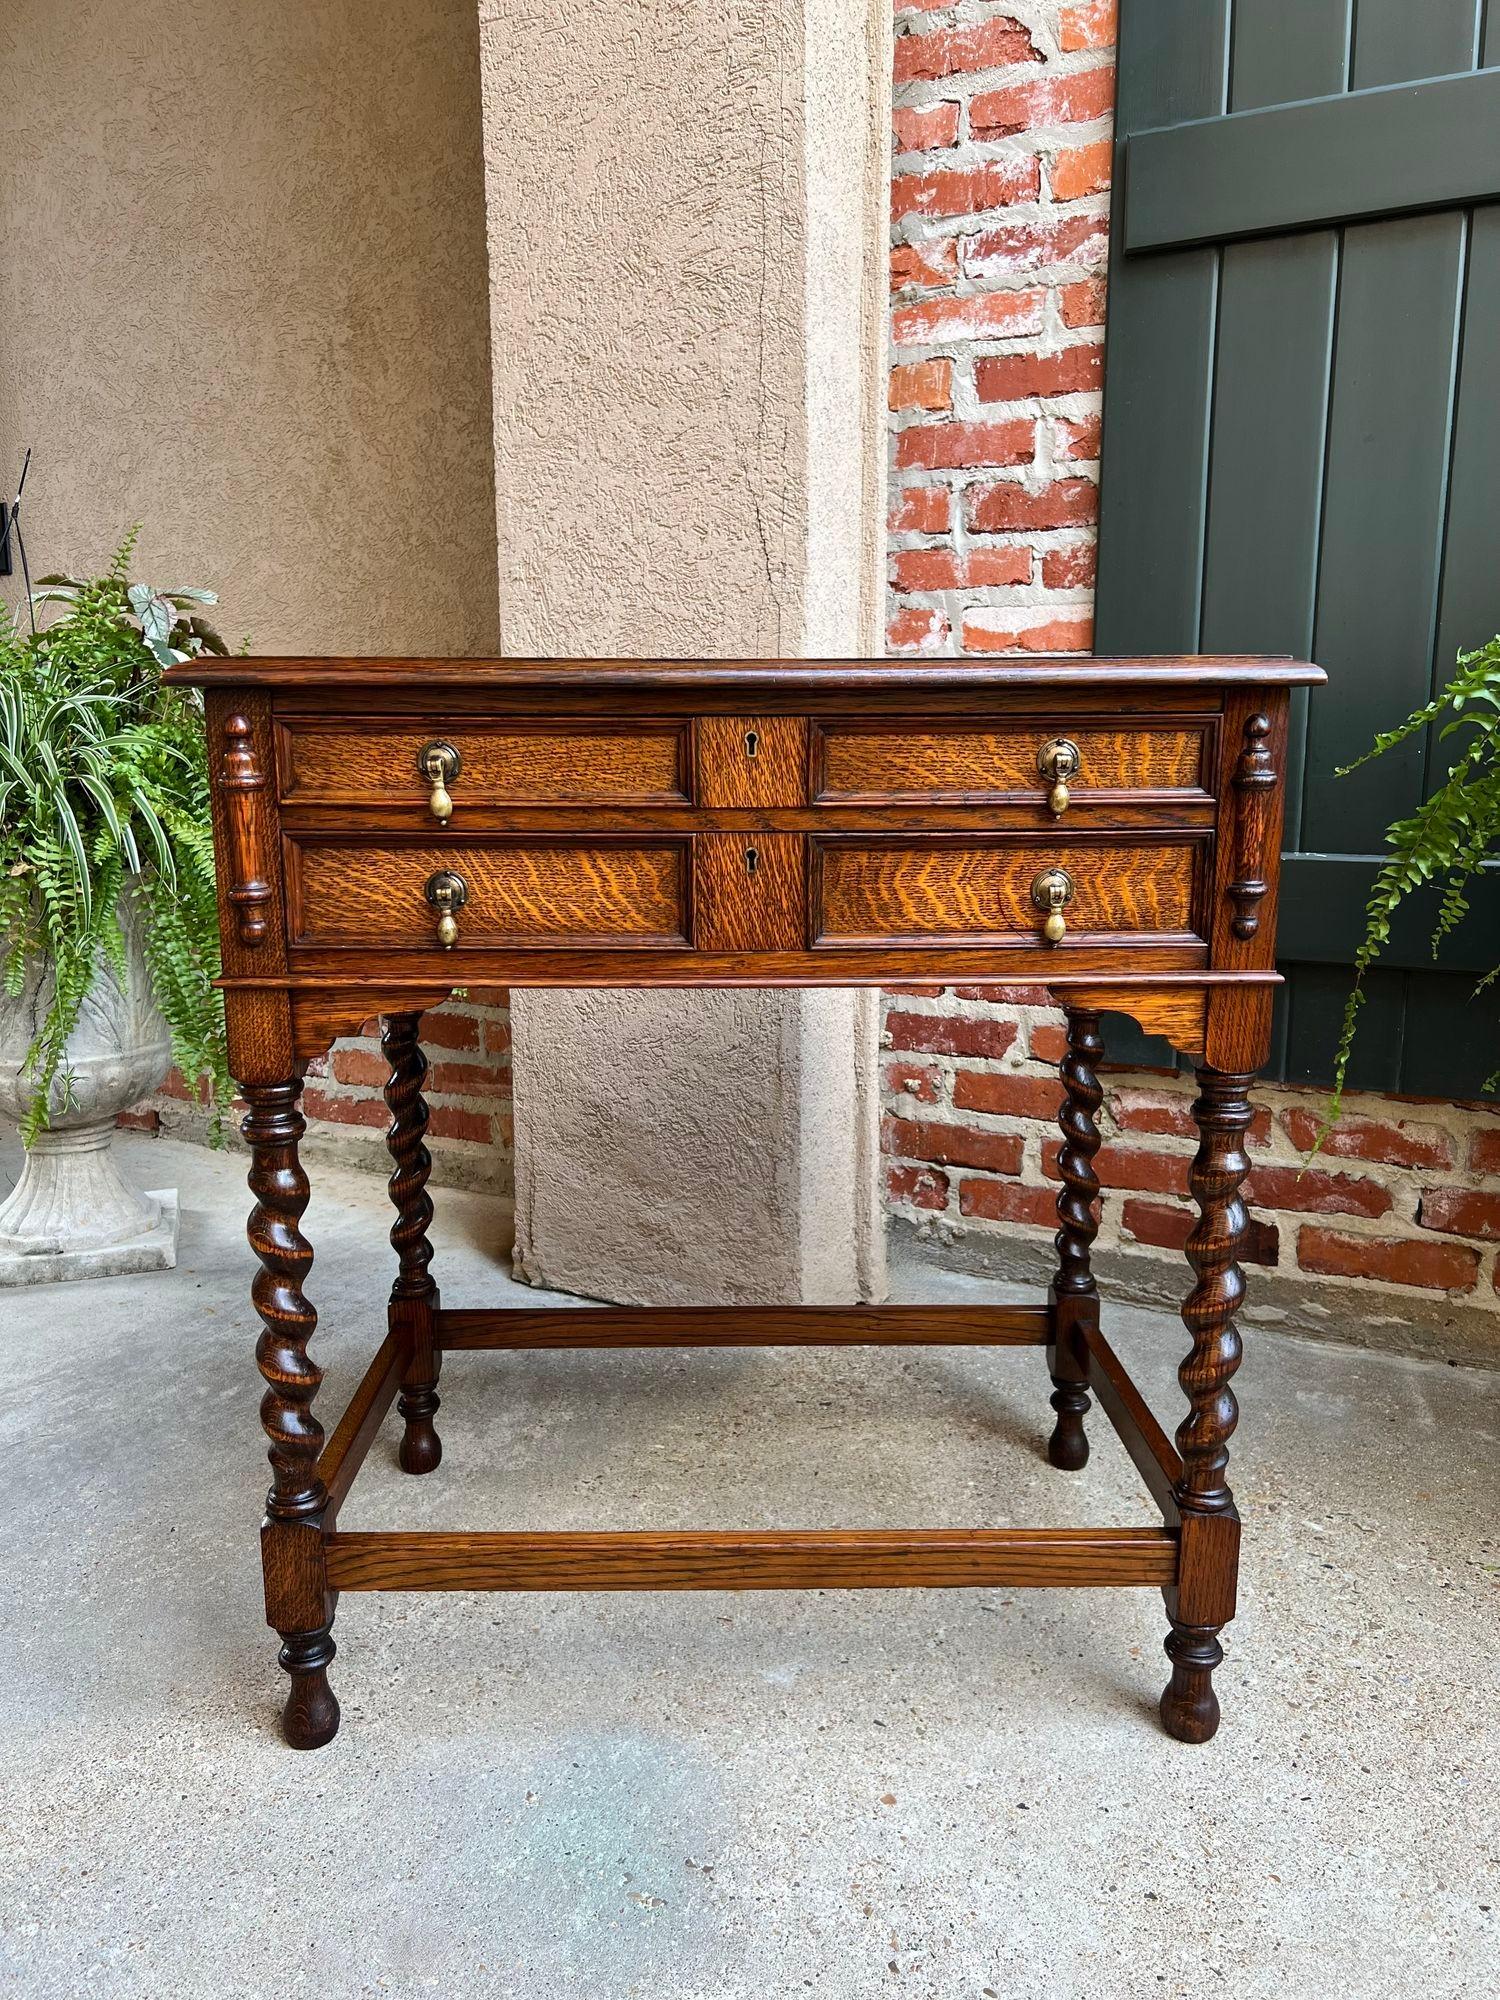 Antique English Hall Table Cutlery Chest Cabinet Barley Twist Jacobean Tiger Oak.

Direct from England, a beautiful side table in lovely Jacobean style! With gorgeous British tiger oak, the table features two full length drawers with paneled fronts,